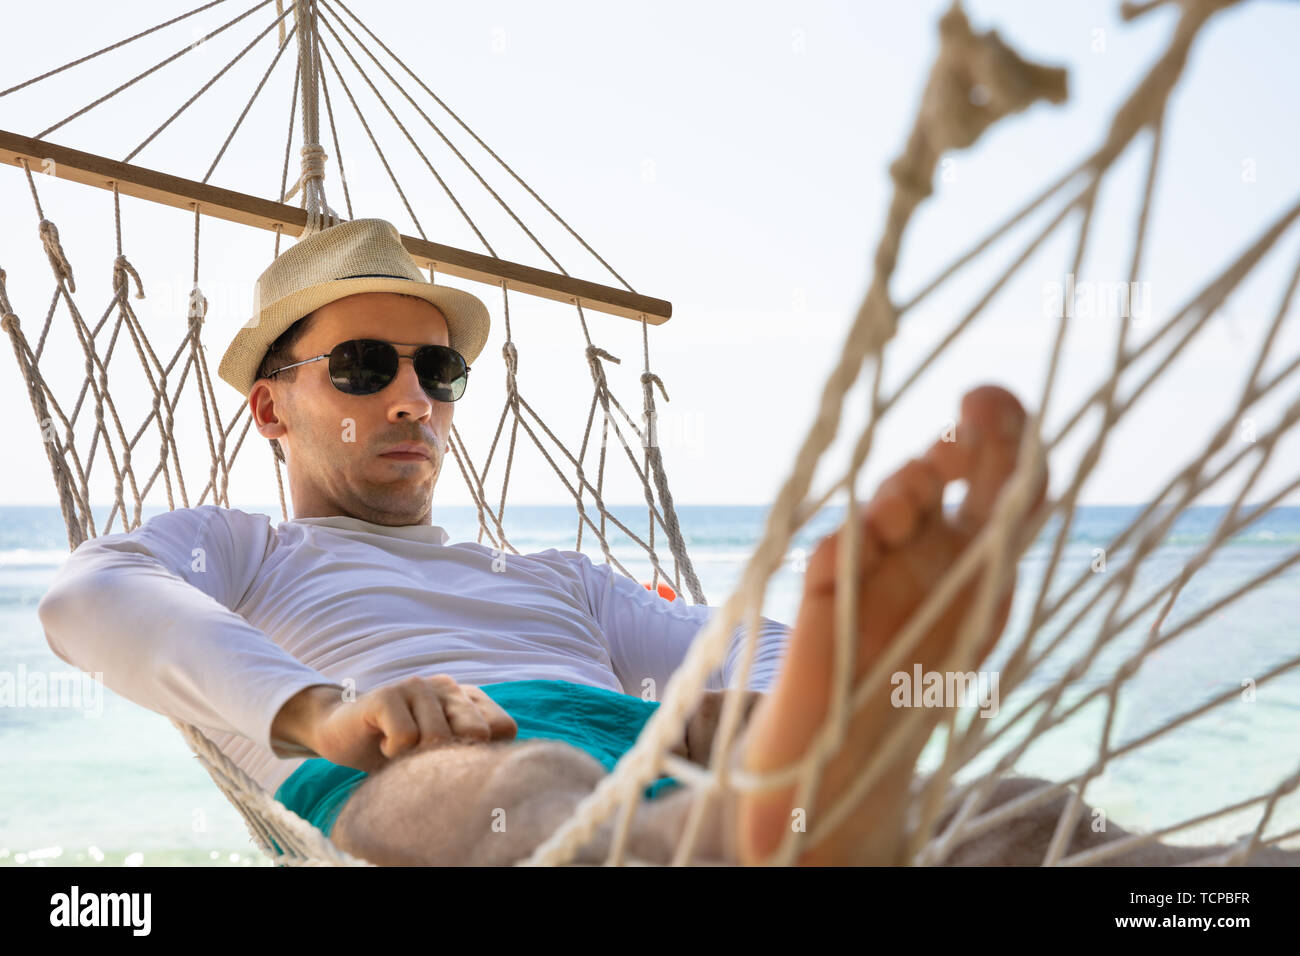 Close-up Of A Man Wearing Sunglasses Lying On Hammock In Front Of Sea At Beach Stock Photo